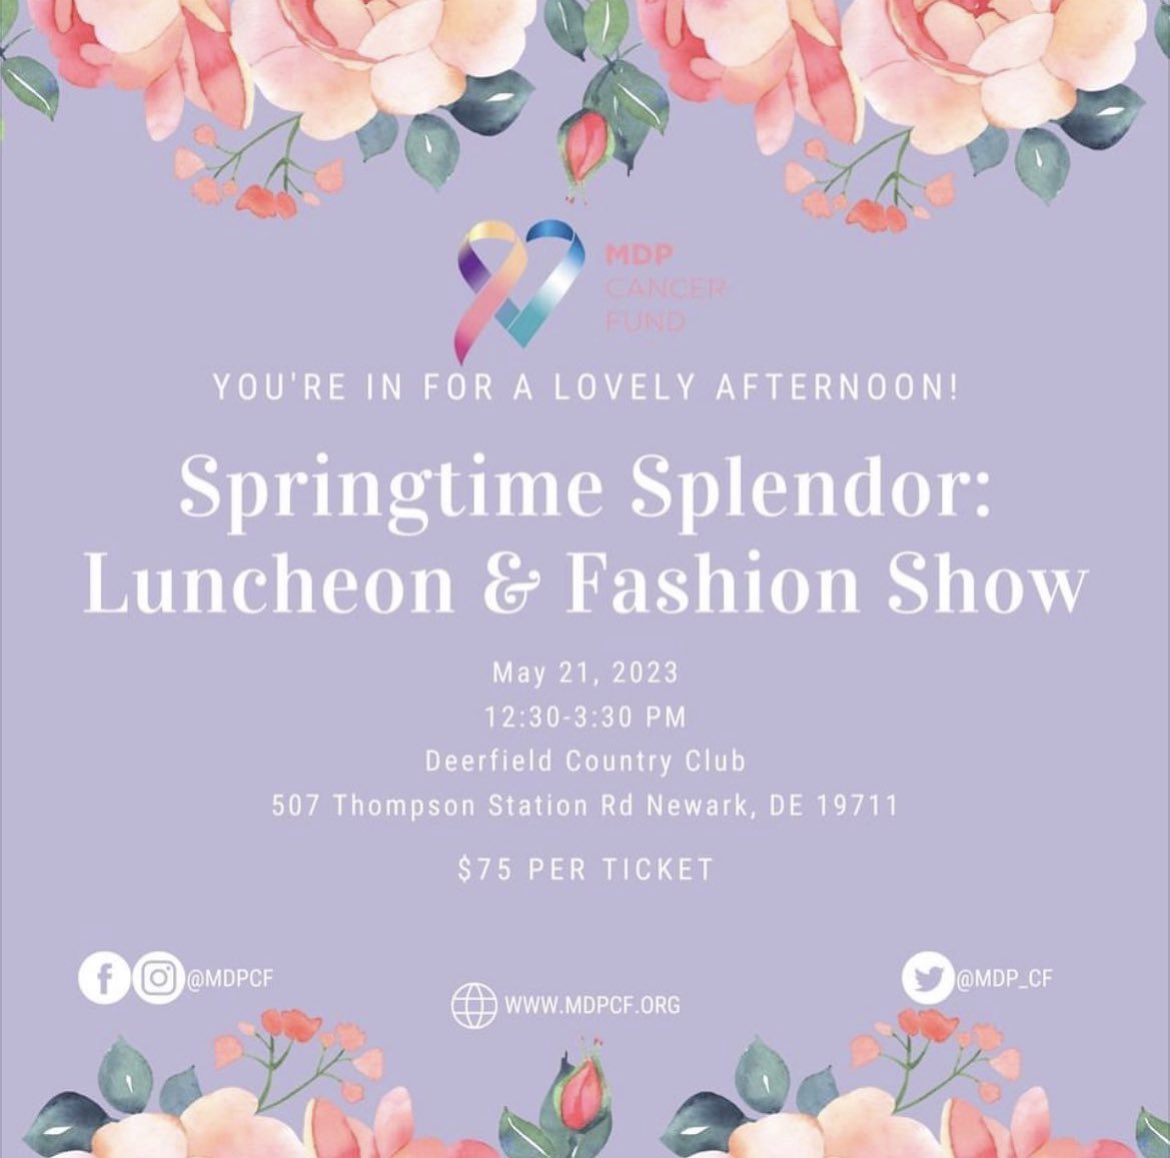 Are you looking to revamp your closet?! Look no further than our Springtime Splendor: Luncheon & Fashion Show!

One of the featured designers in this year's fashion show will be @CityChicOnline! Tix are going FAST so get yours today! 

#MDPCF #fundraiser #fundraiserevent #fashion